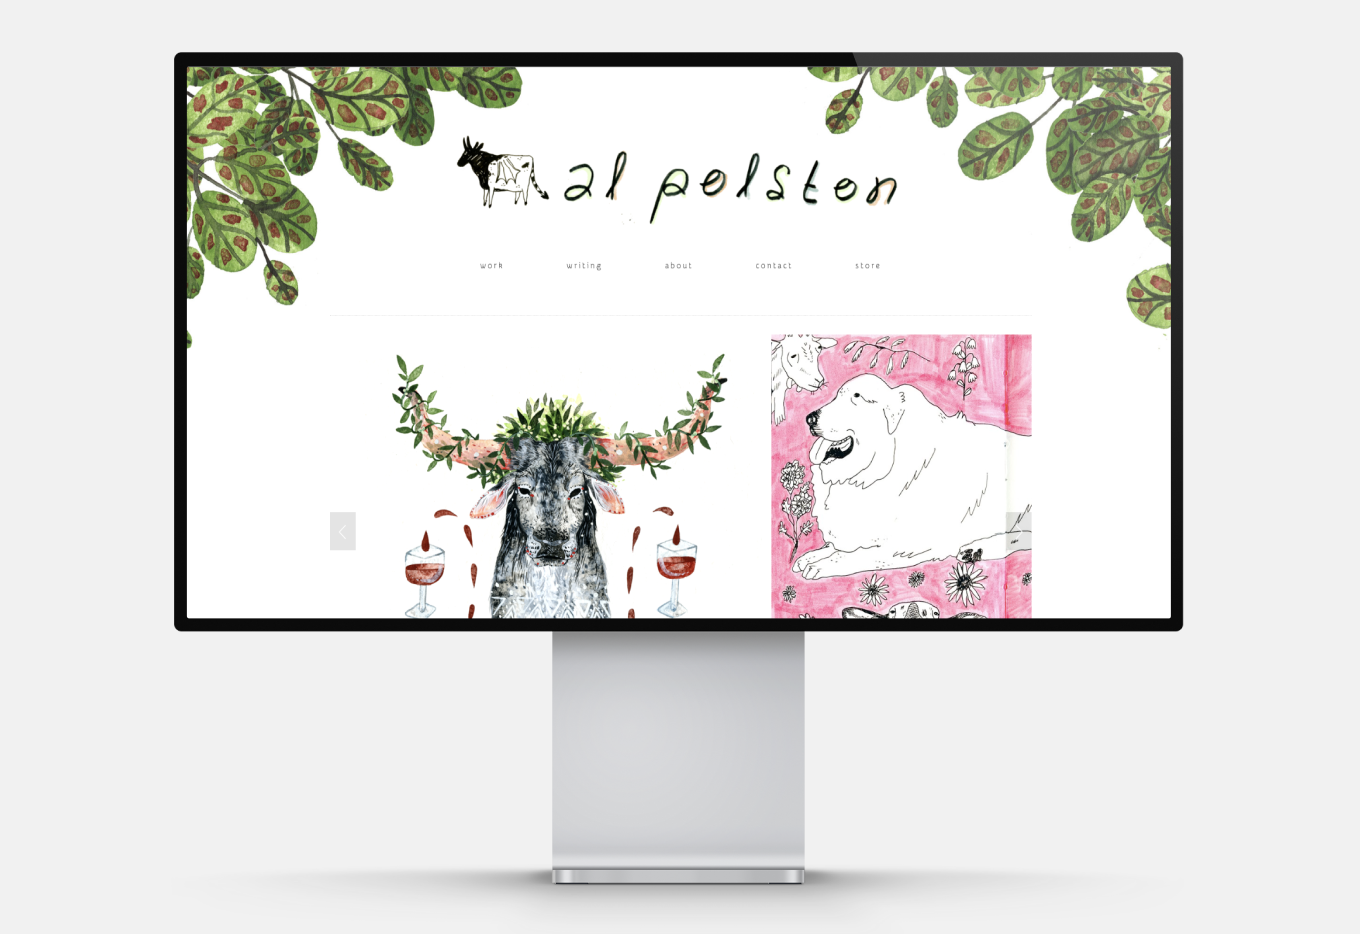 A portfolio with leaves painted on the background and images in a carousel view.